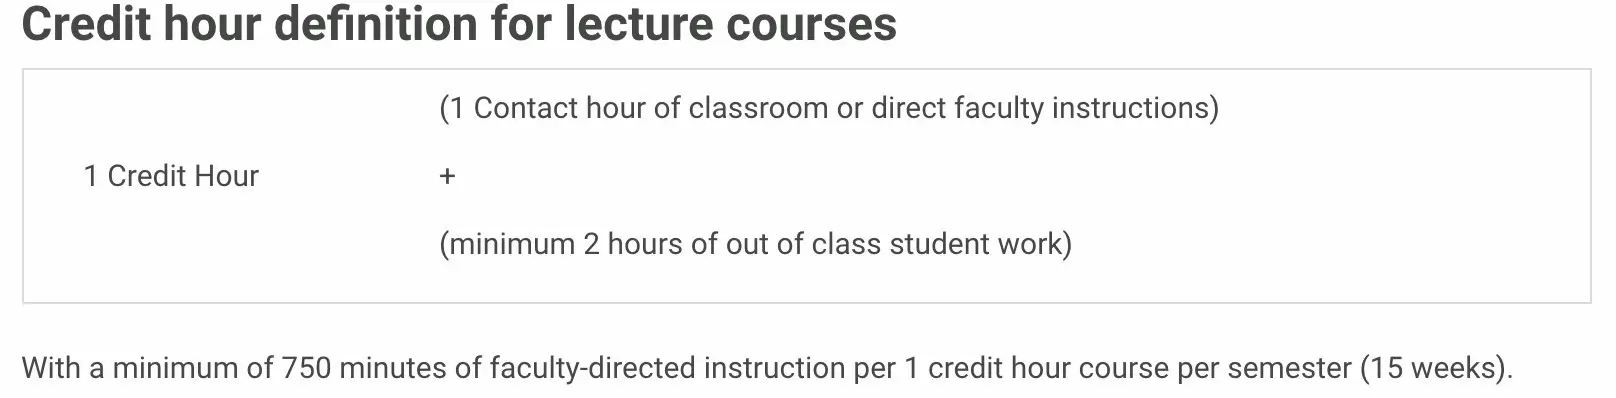 Credit hour definition of lecture course